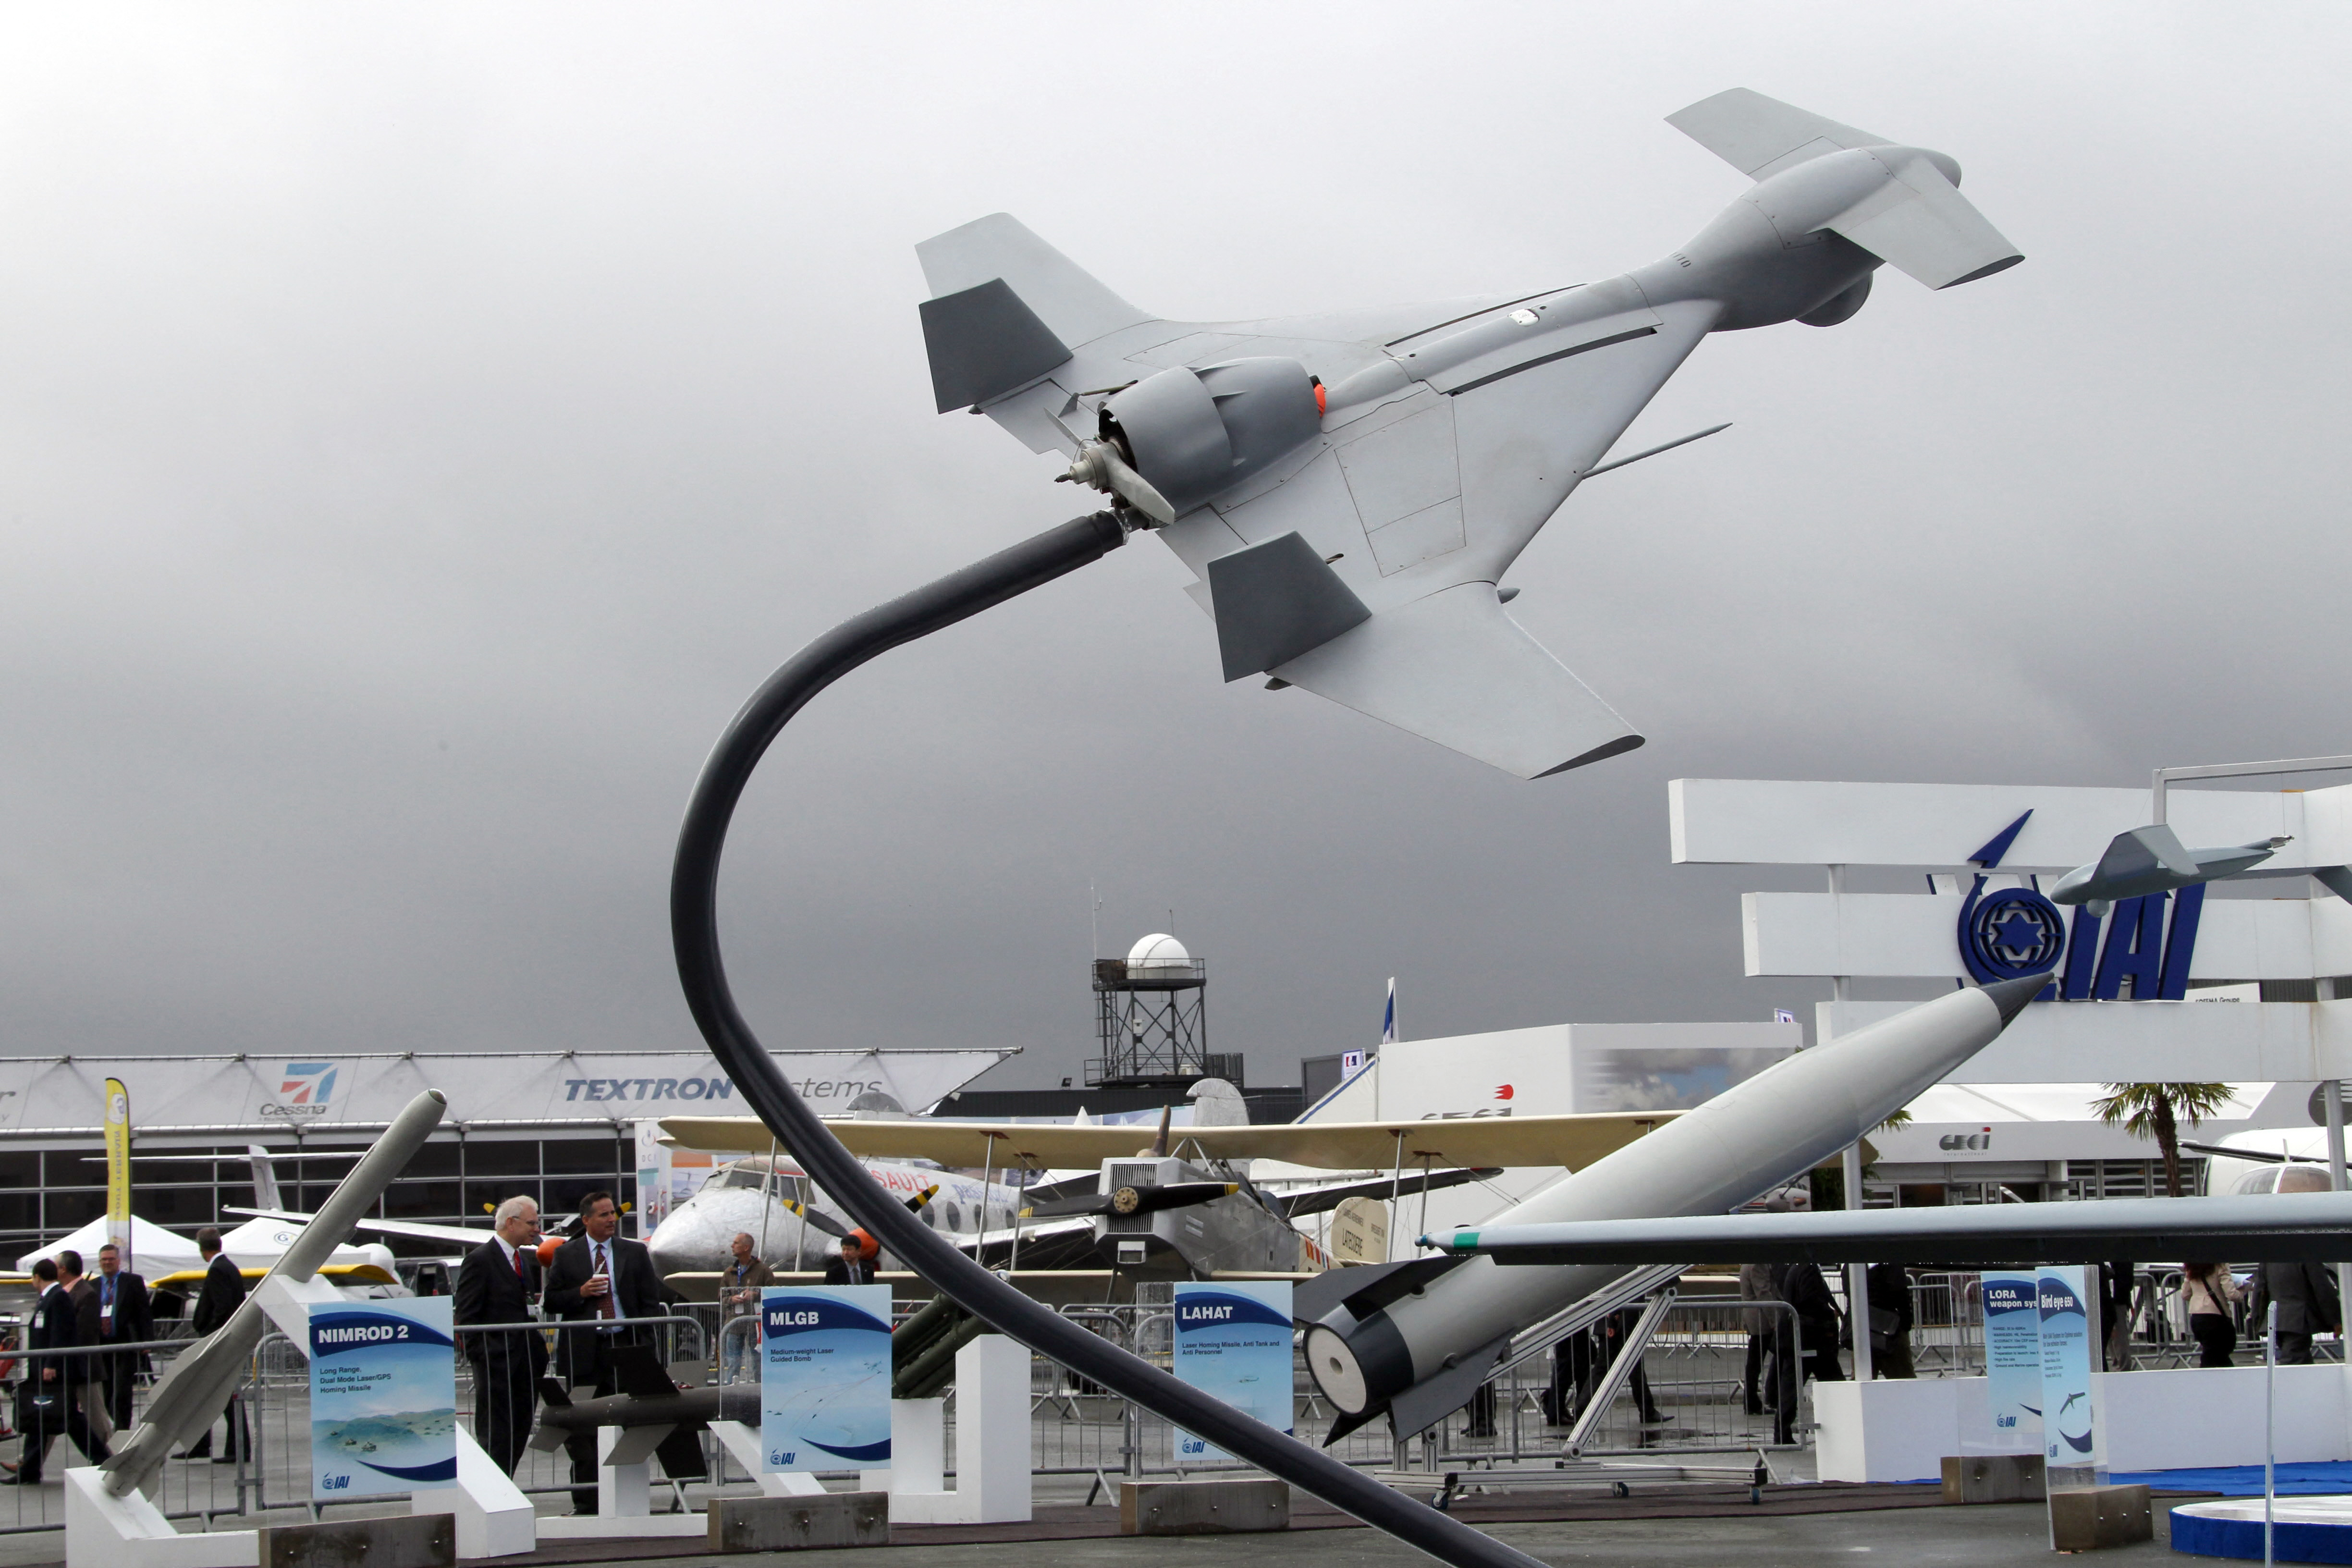 An Israeli drone is displayed at the International Paris Air Show in June 2011 (AFP)